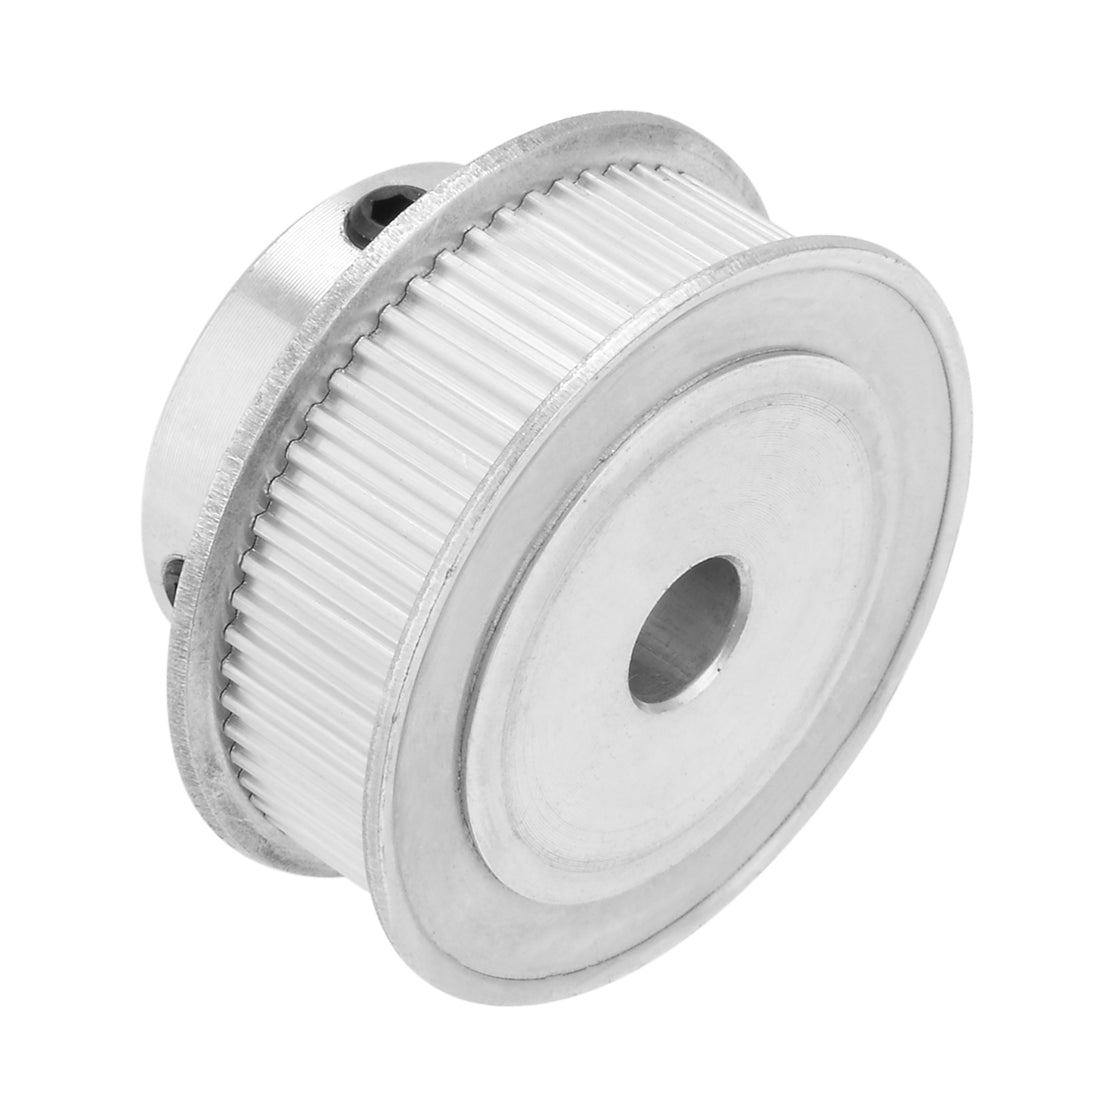 uxcell Uxcell Aluminum M-X-L 60 Teeth 8mm Bore Timing Belt Idler Pulley Synchronous Wheel 10mm Belt for 3D Printer CNC